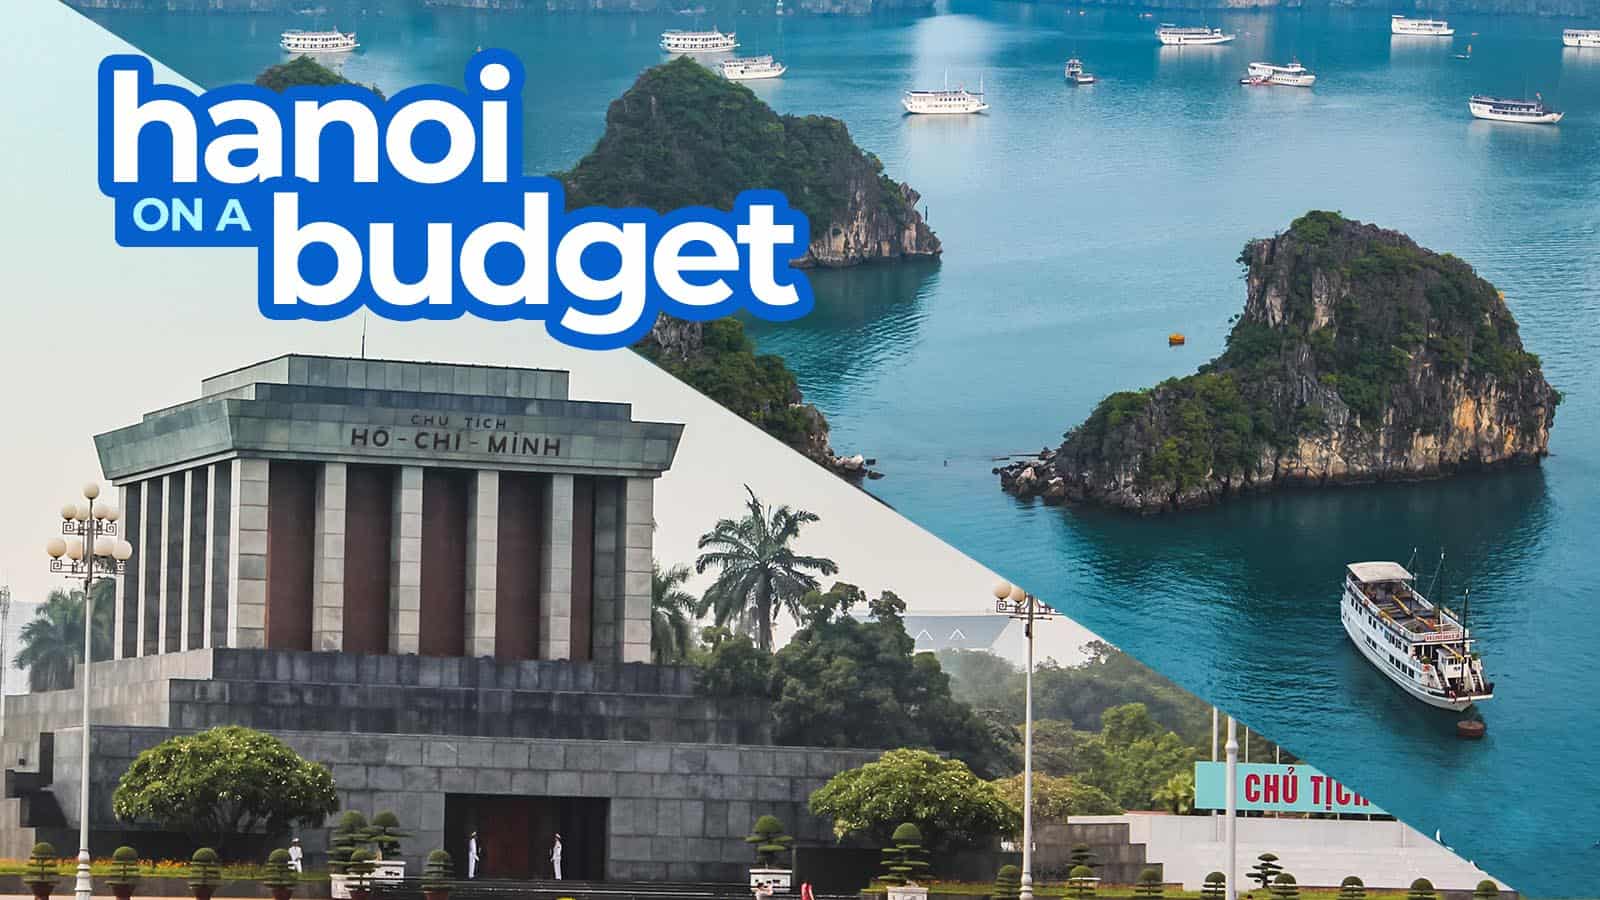 HANOI TRAVEL GUIDE: Budget Itinerary, Things to Do